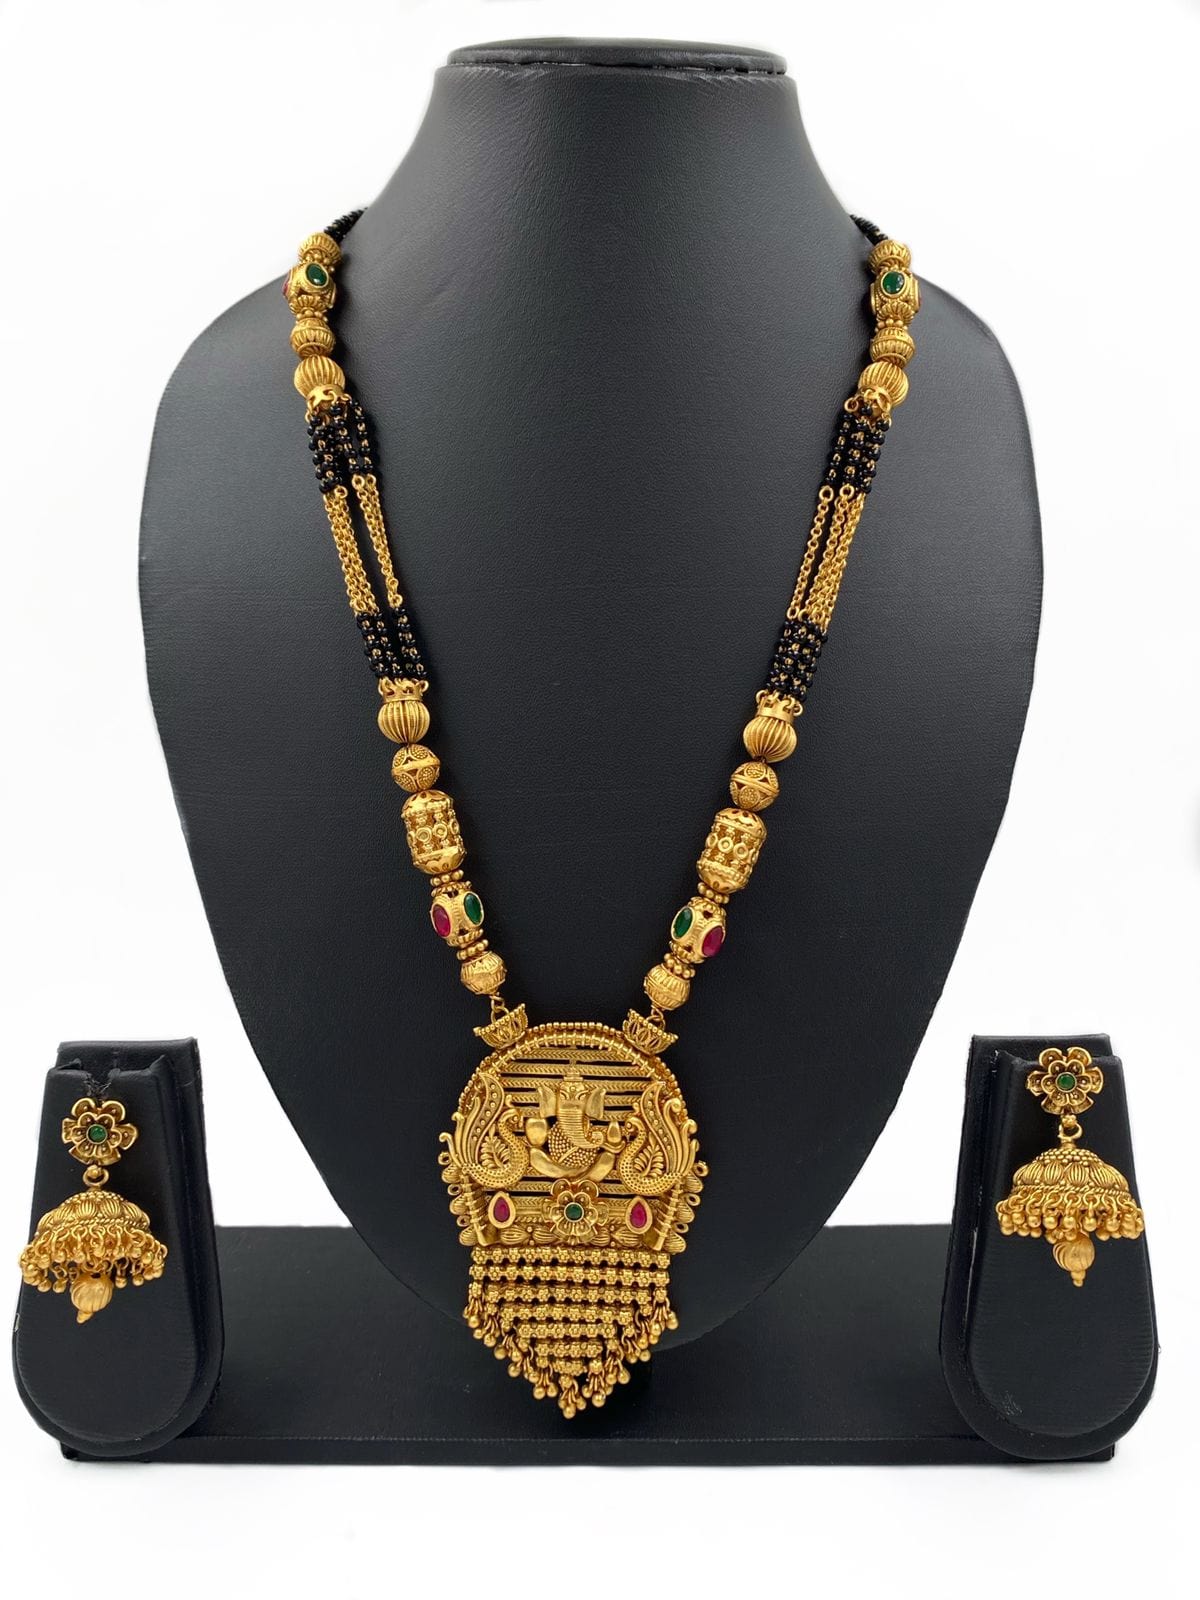 South Indian Lord Ganesha Temple Mangalsutra Necklace Set By Gehna Shop Mangalsutras